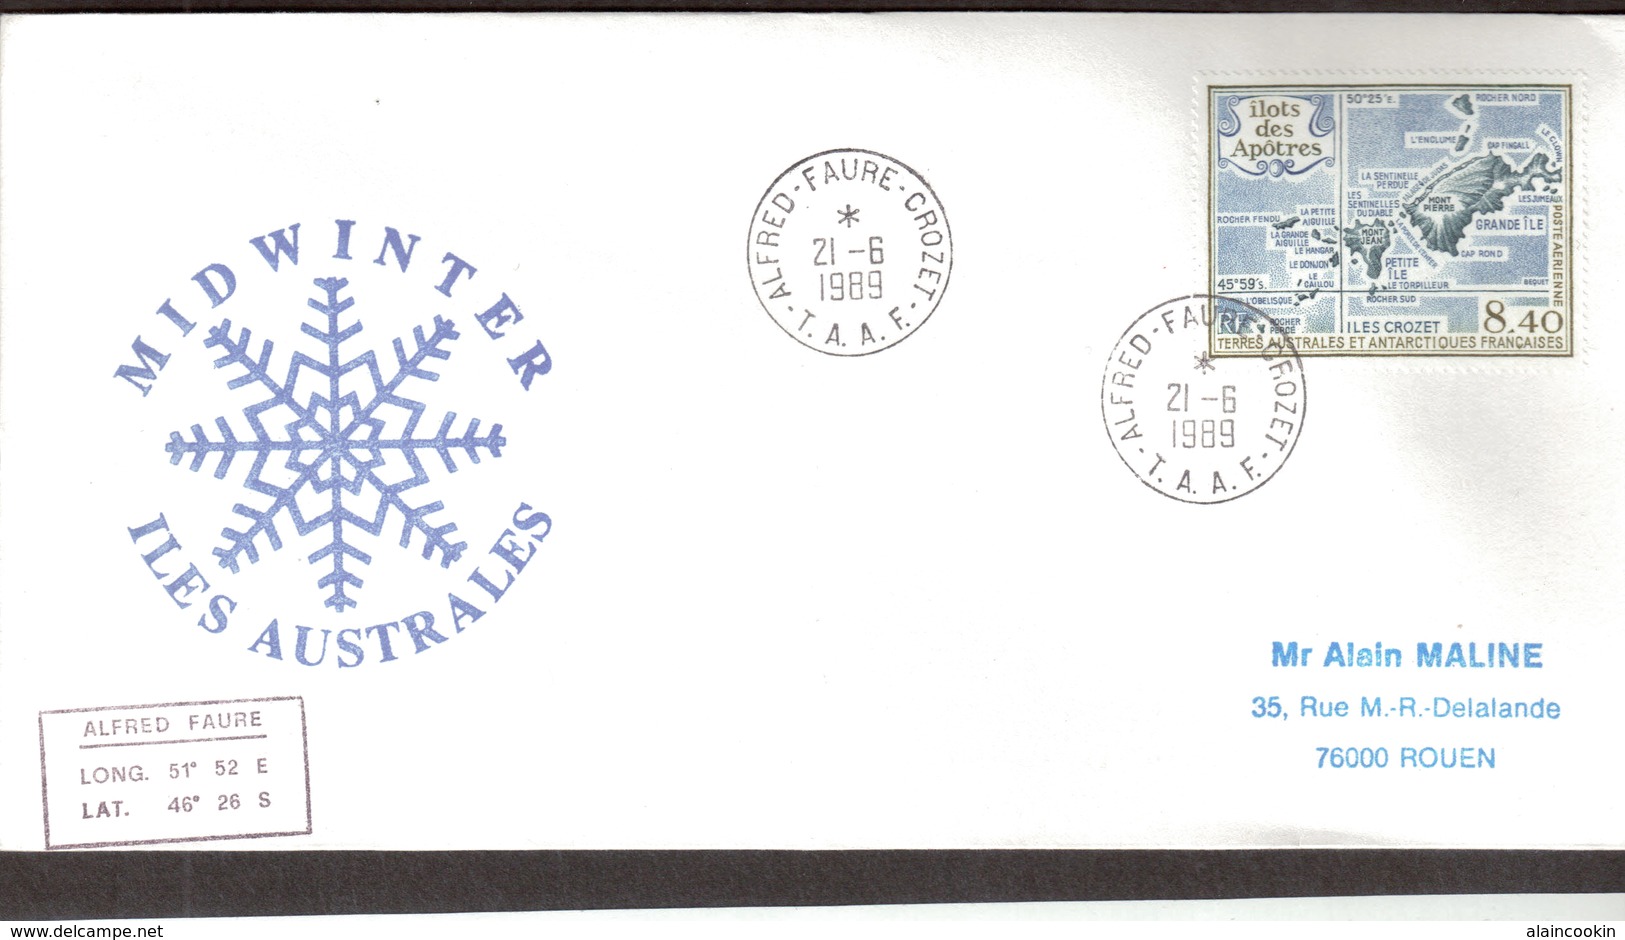 Cvio - TAAF - PA 103 -Midwinter 21.6.1989 CROZET - - Covers & Documents